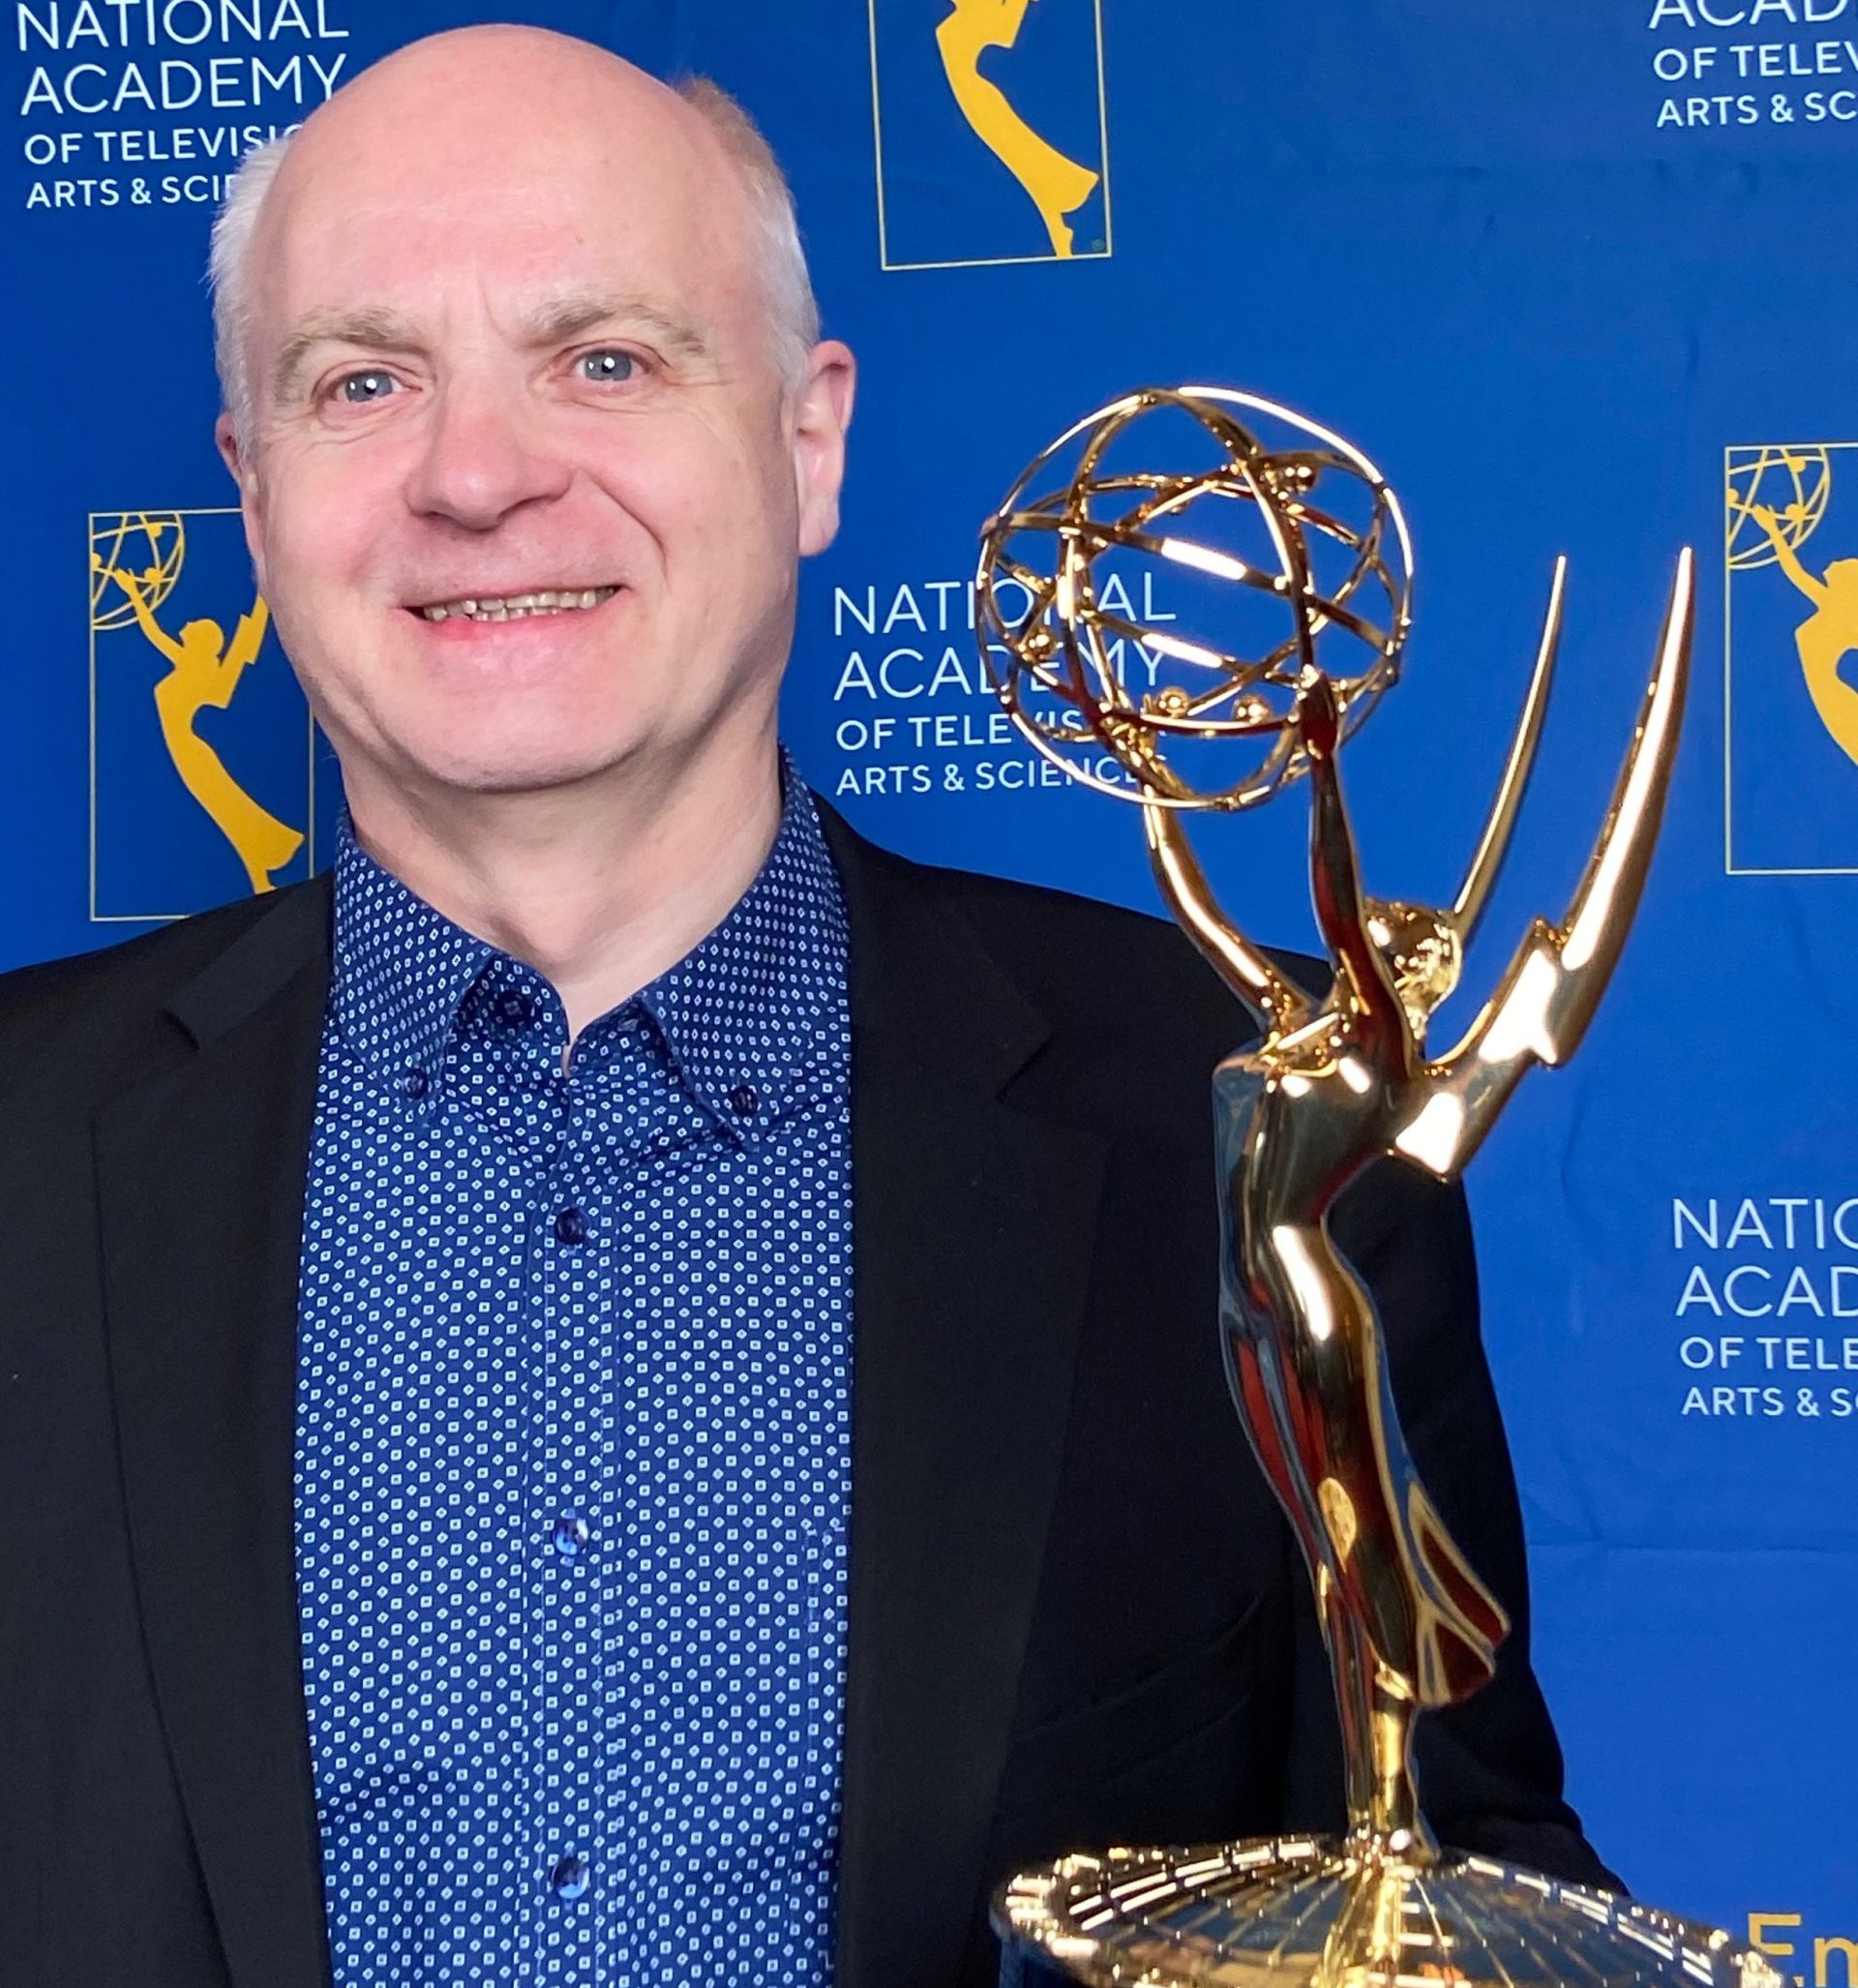 The National Academy of Television Arts & Sciences recognized VITEC as 2022 Technology & Engineering Emmy® Award recipient for the EZ TV IPTV Platform.